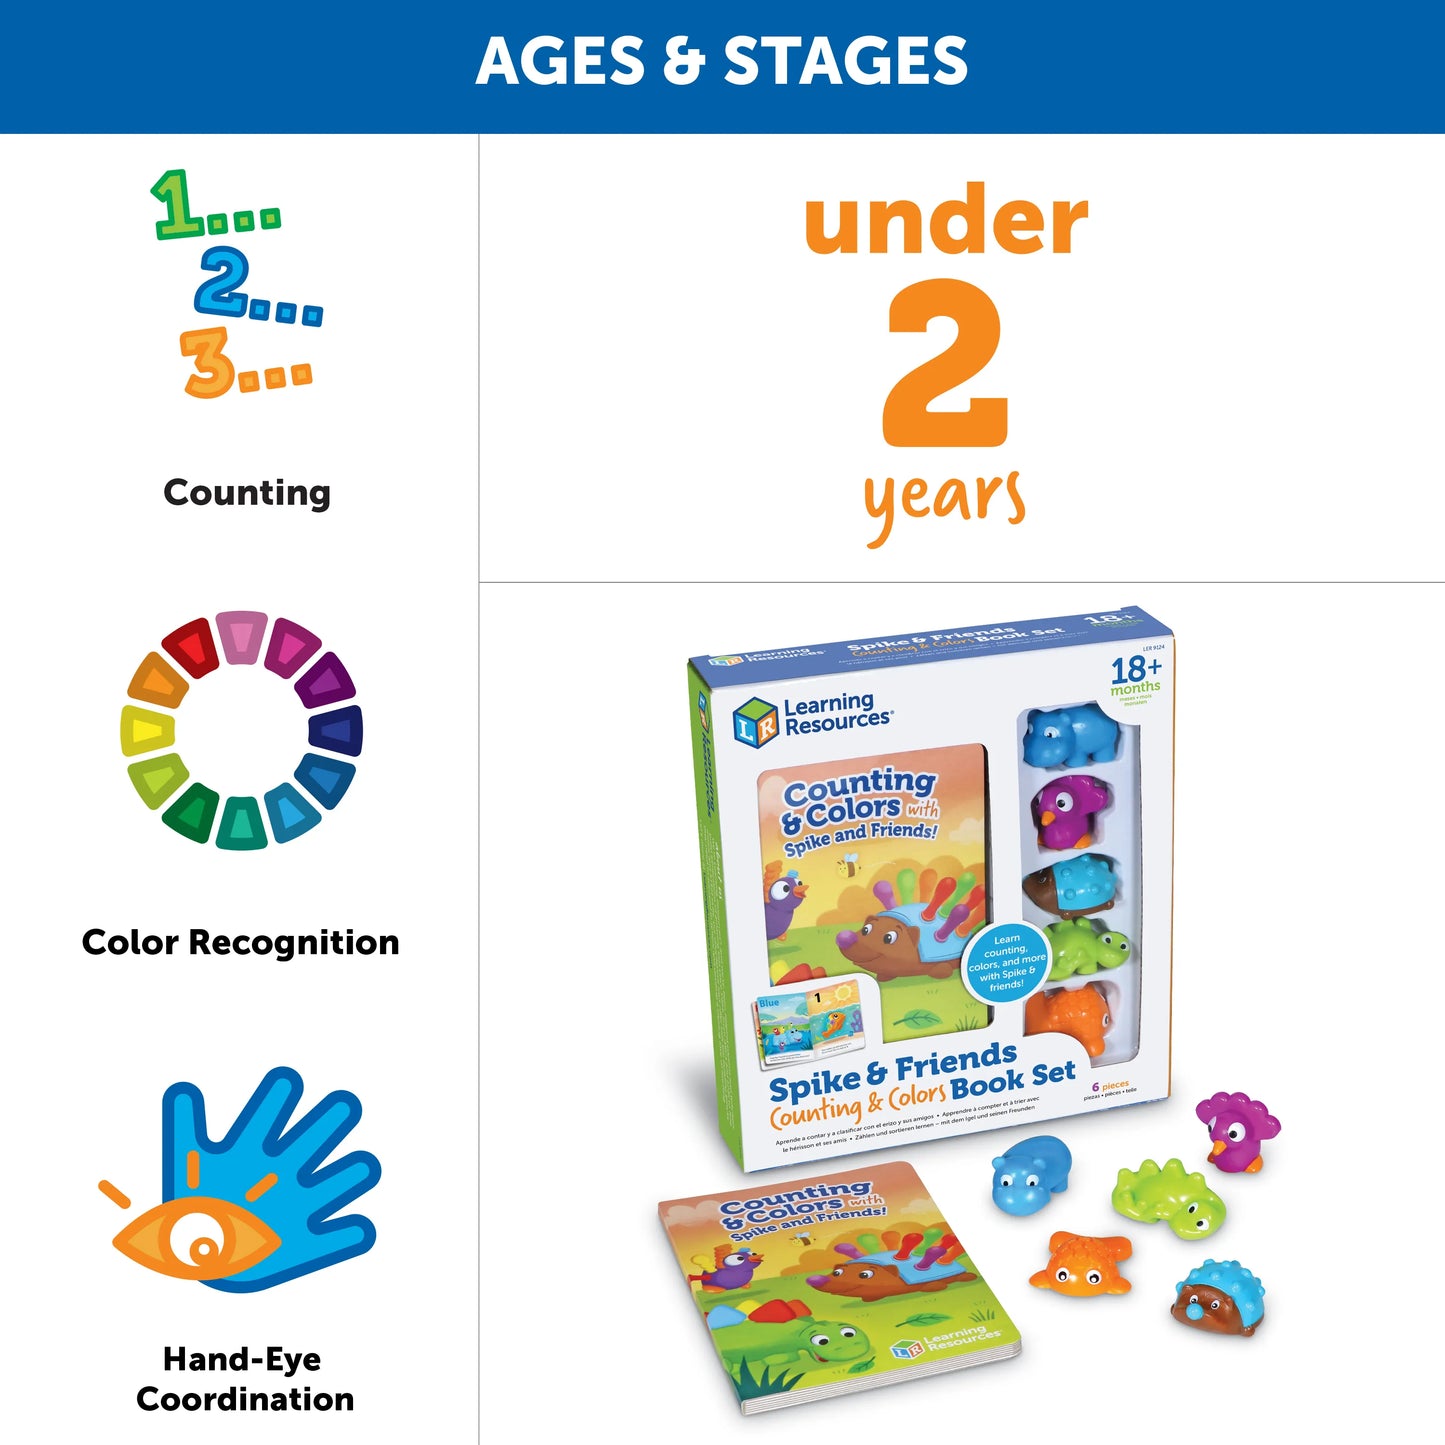 Learning Resources Spike and Friends Colors & Counting Book Set